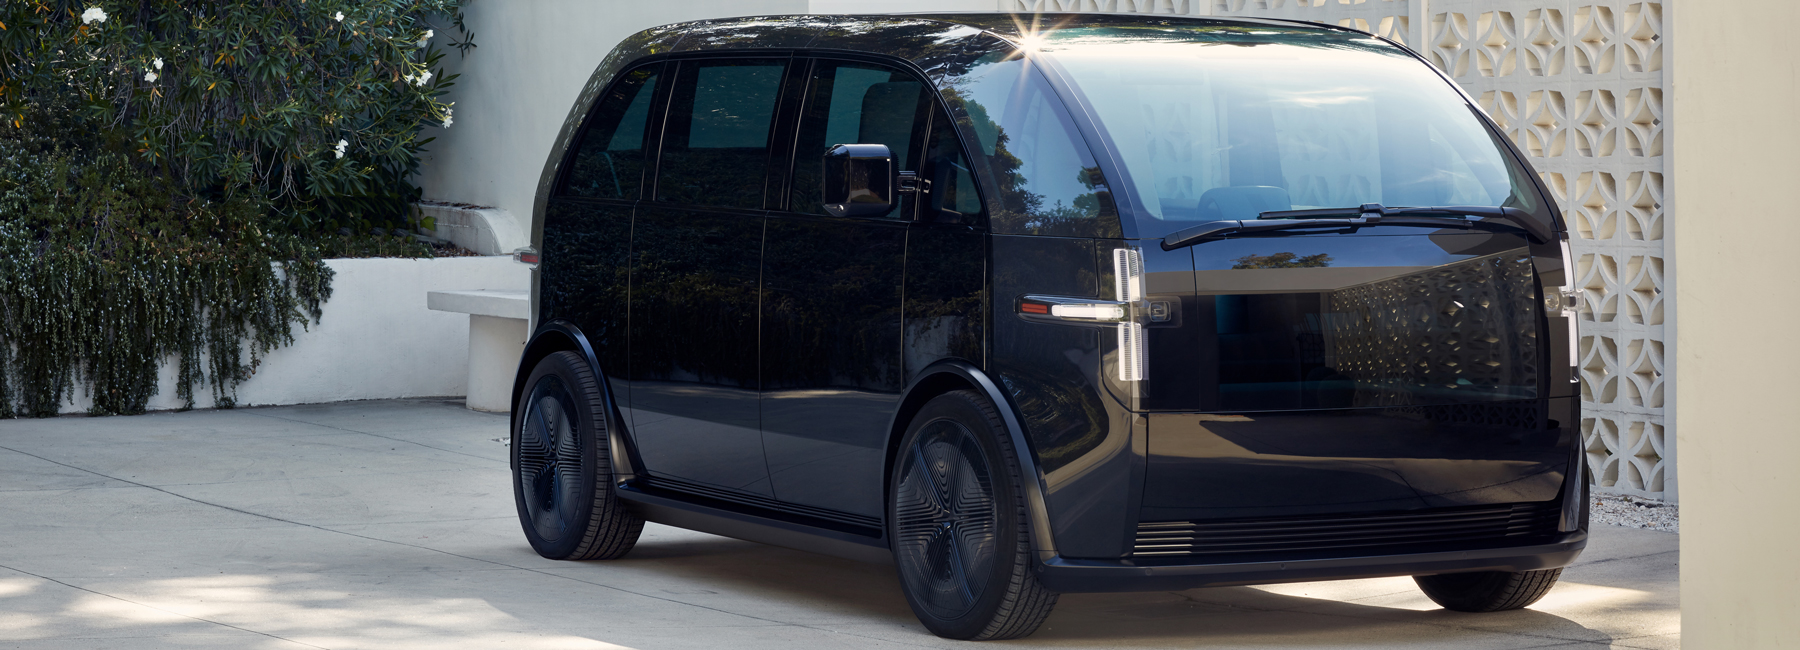 Canoo Debuts World's First Subscription-only Electric Vehicle